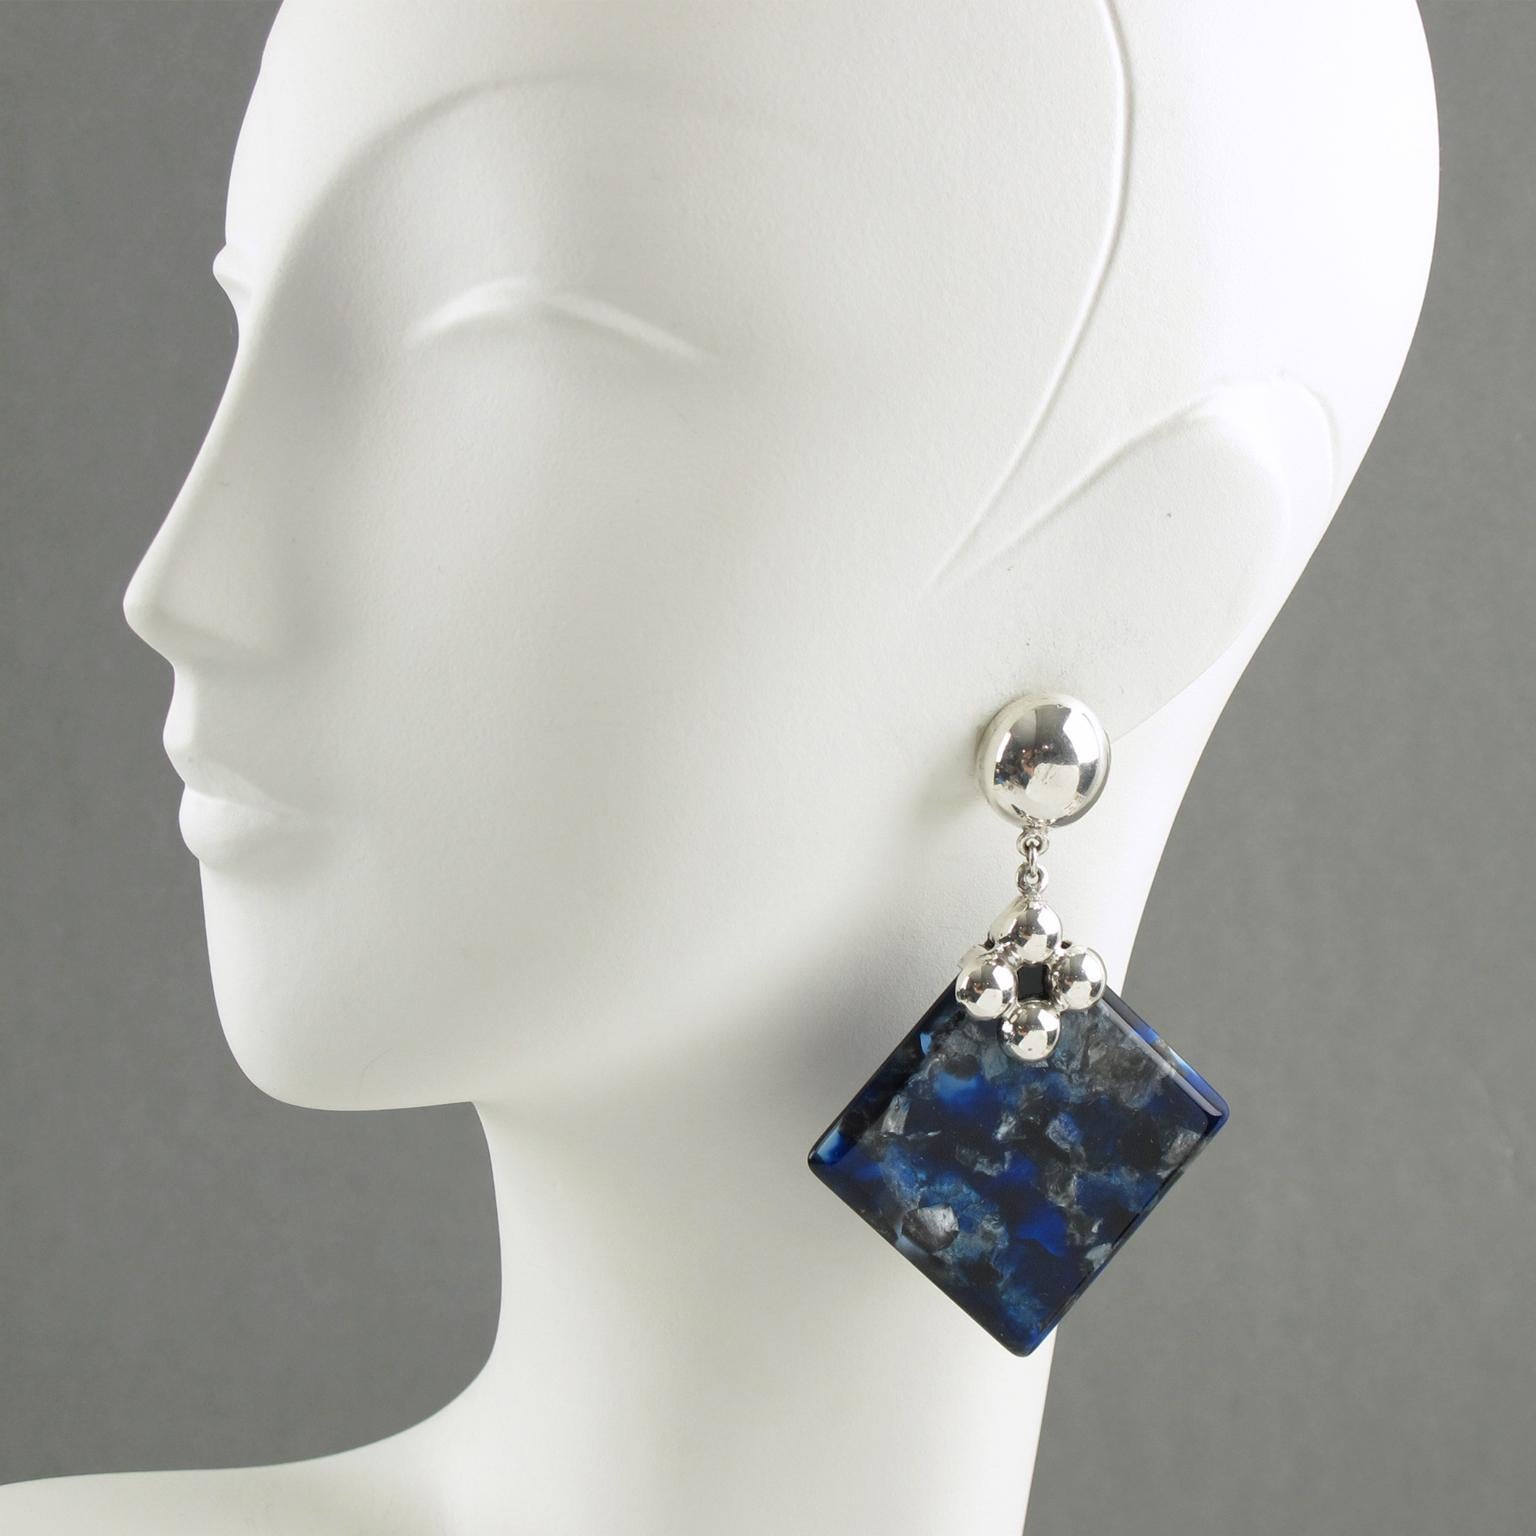 Lovely silver plate and lucite dangling clip-on earrings. Polished silver plate hardware and clip holding a thick geometric piece of lucite in incredible electric blue, black, and grey marble color with a pearlized textured pattern. There is no